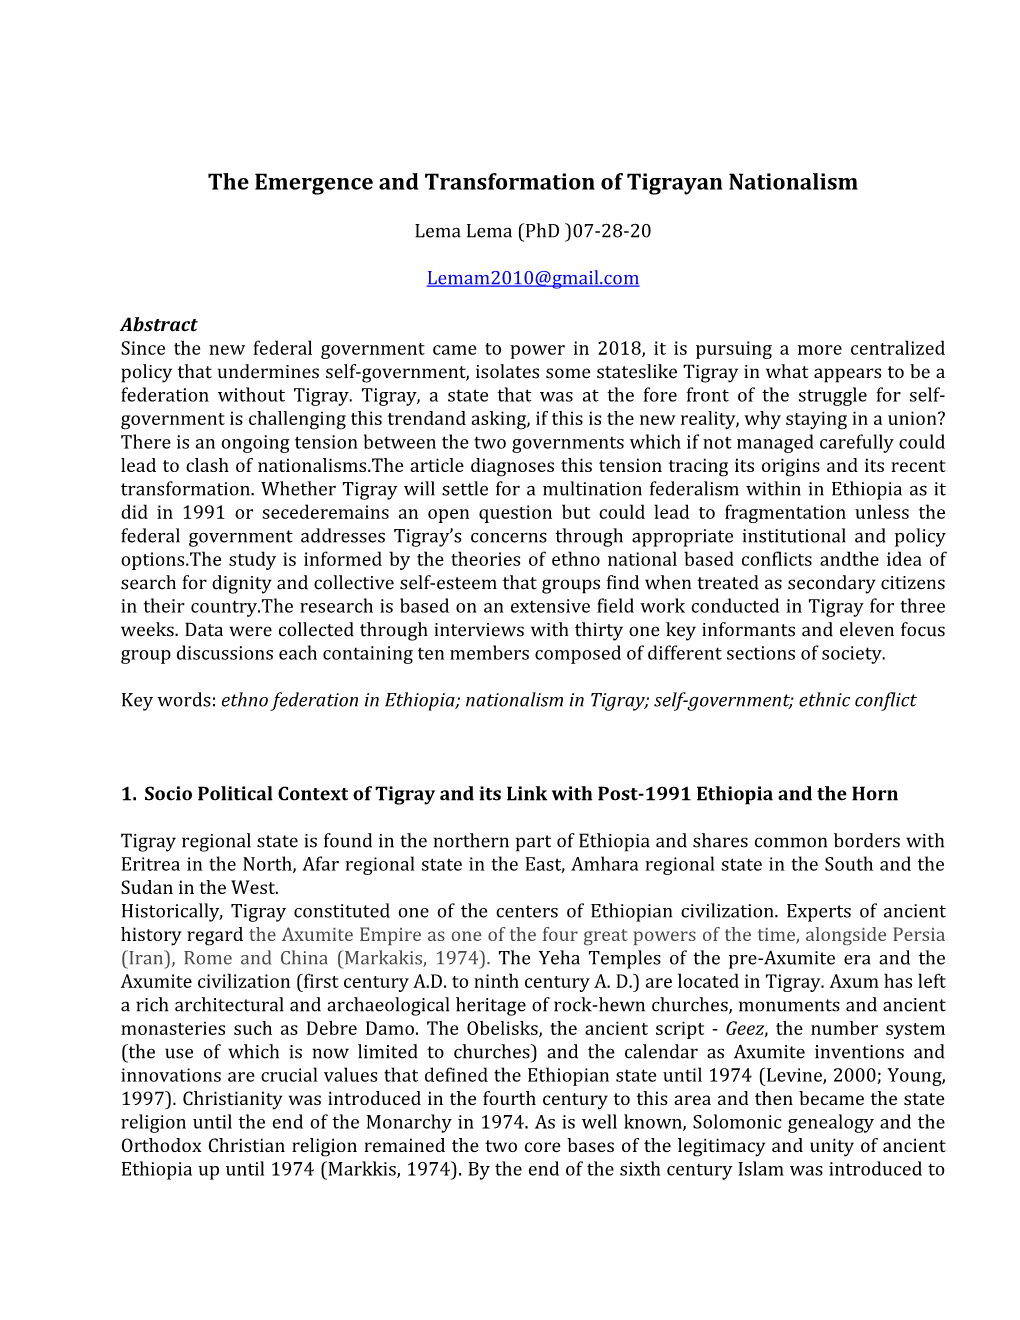 The Emergence and Transformation of Tigrayan Nationalism